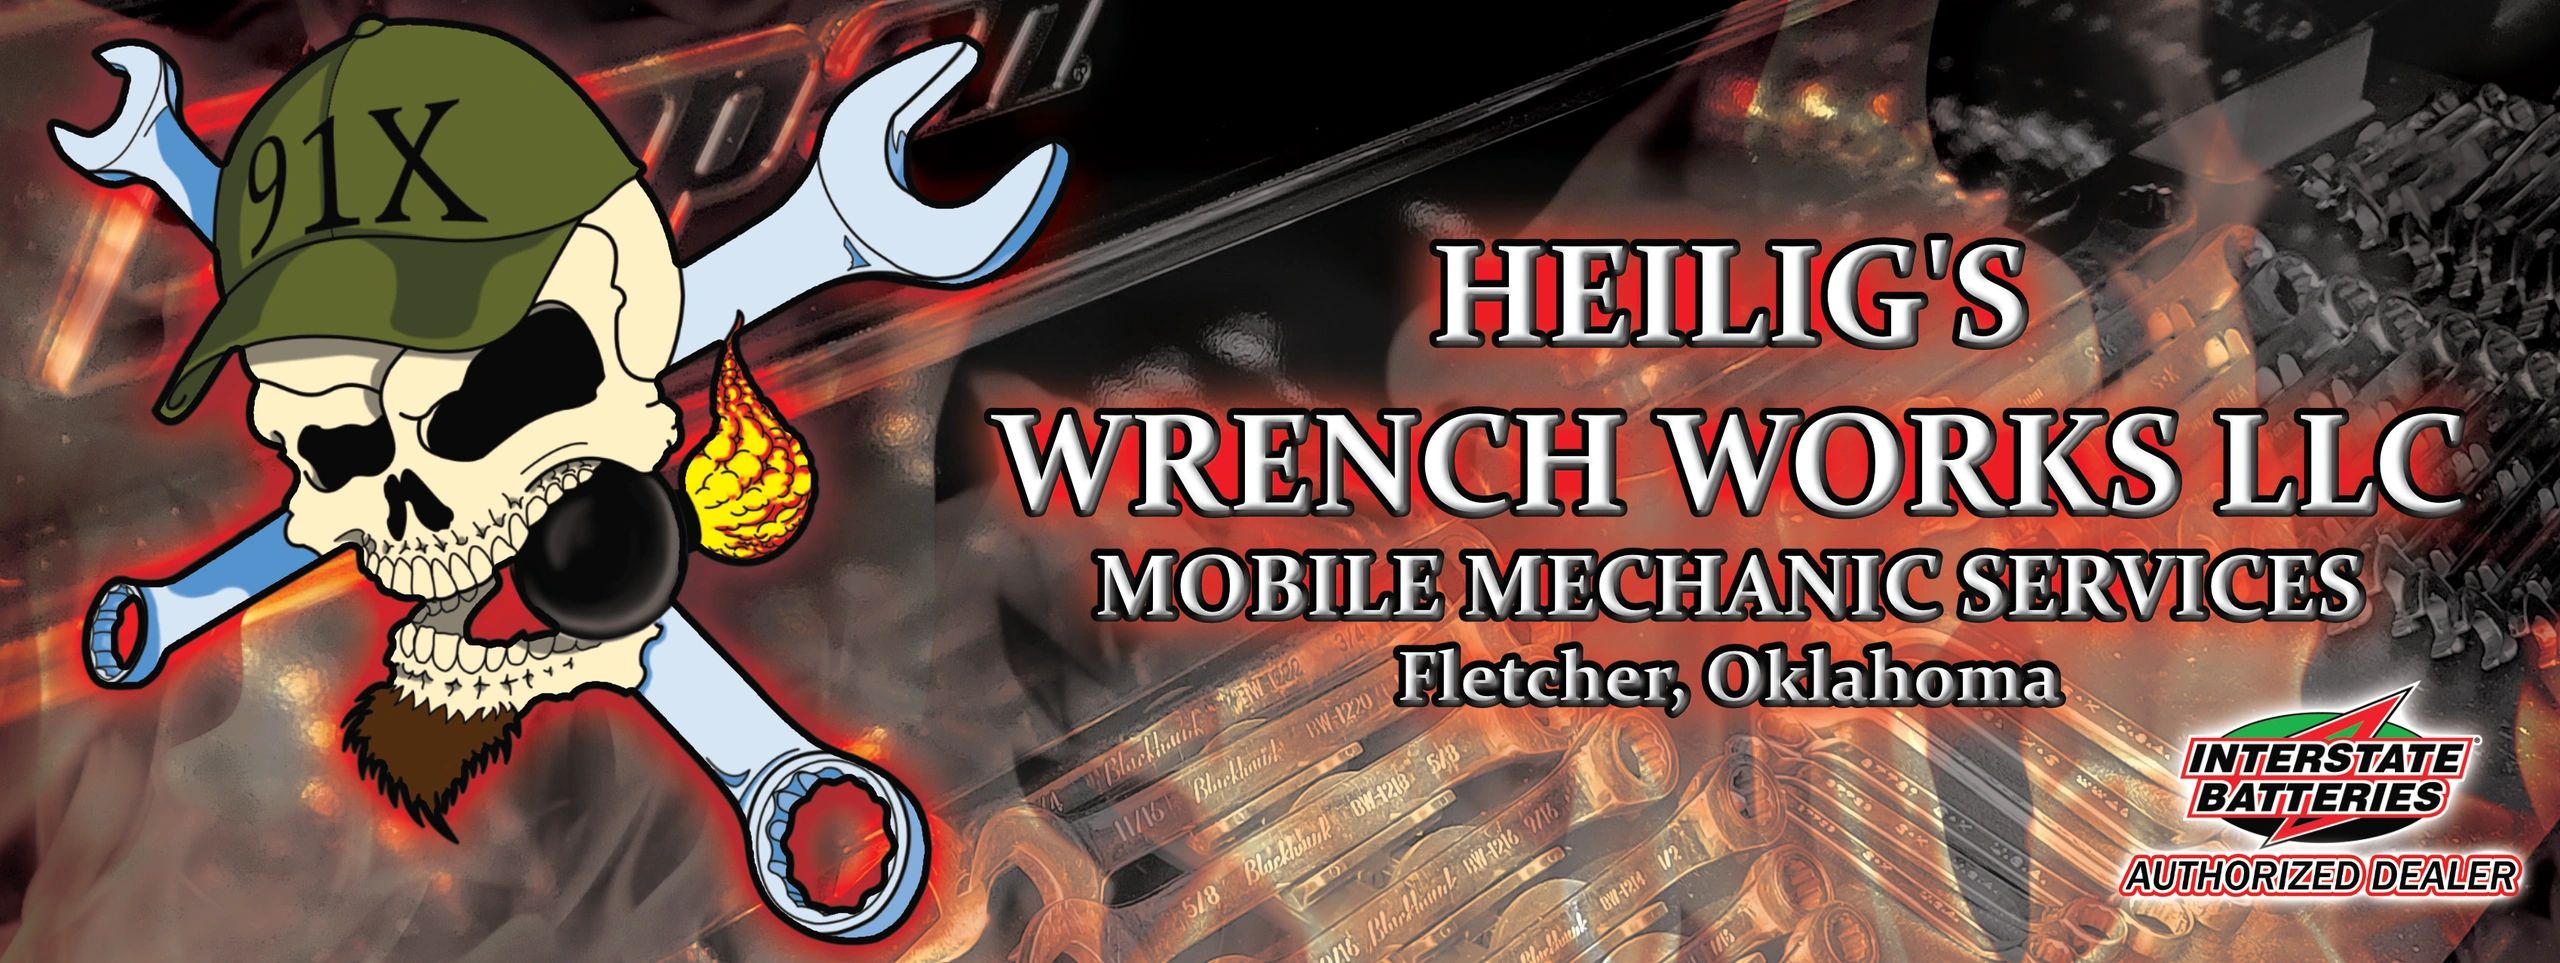 Heilig's Wrench Works - Automotive Repair, Mobile Mechanic Services